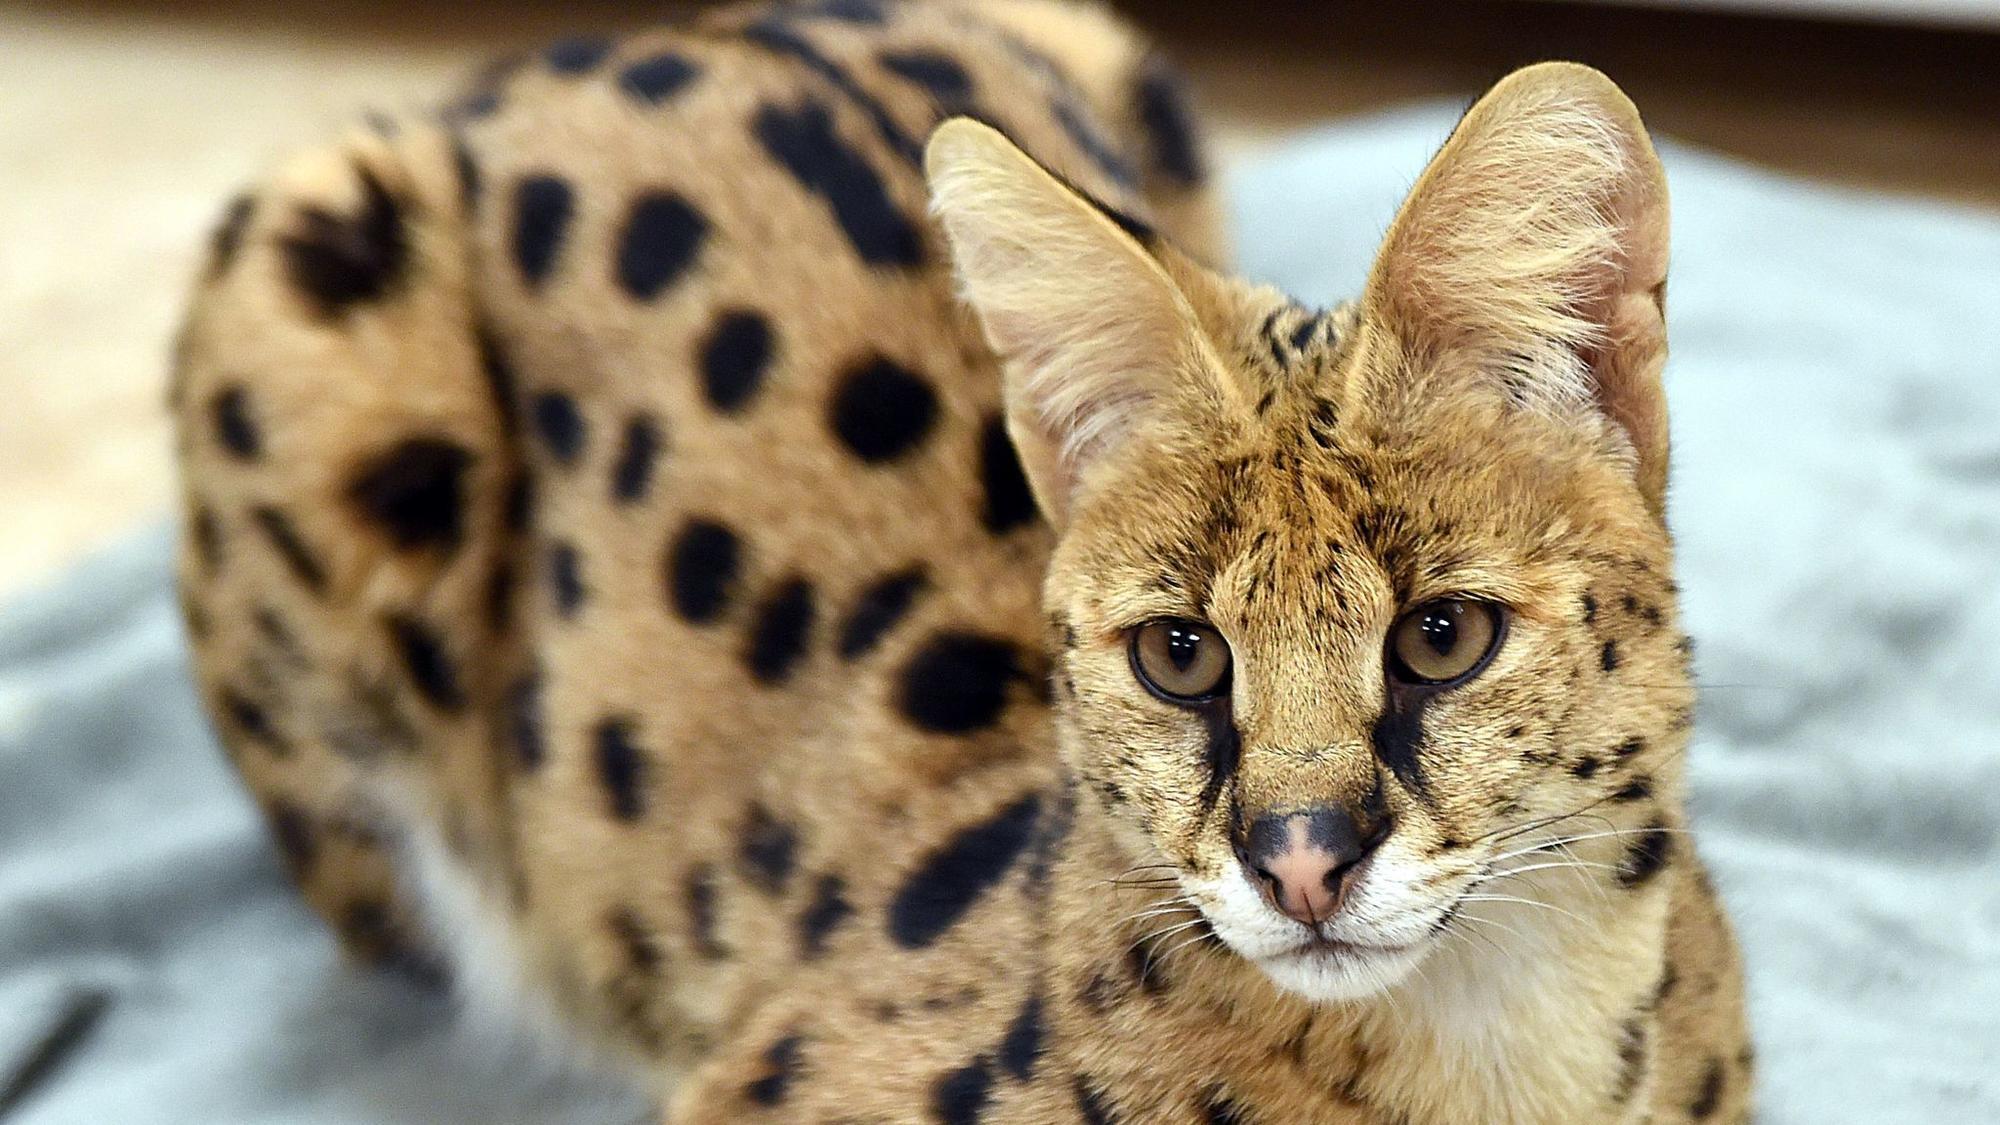 Big cheetah-like cat captured in Reading - The Morning Call